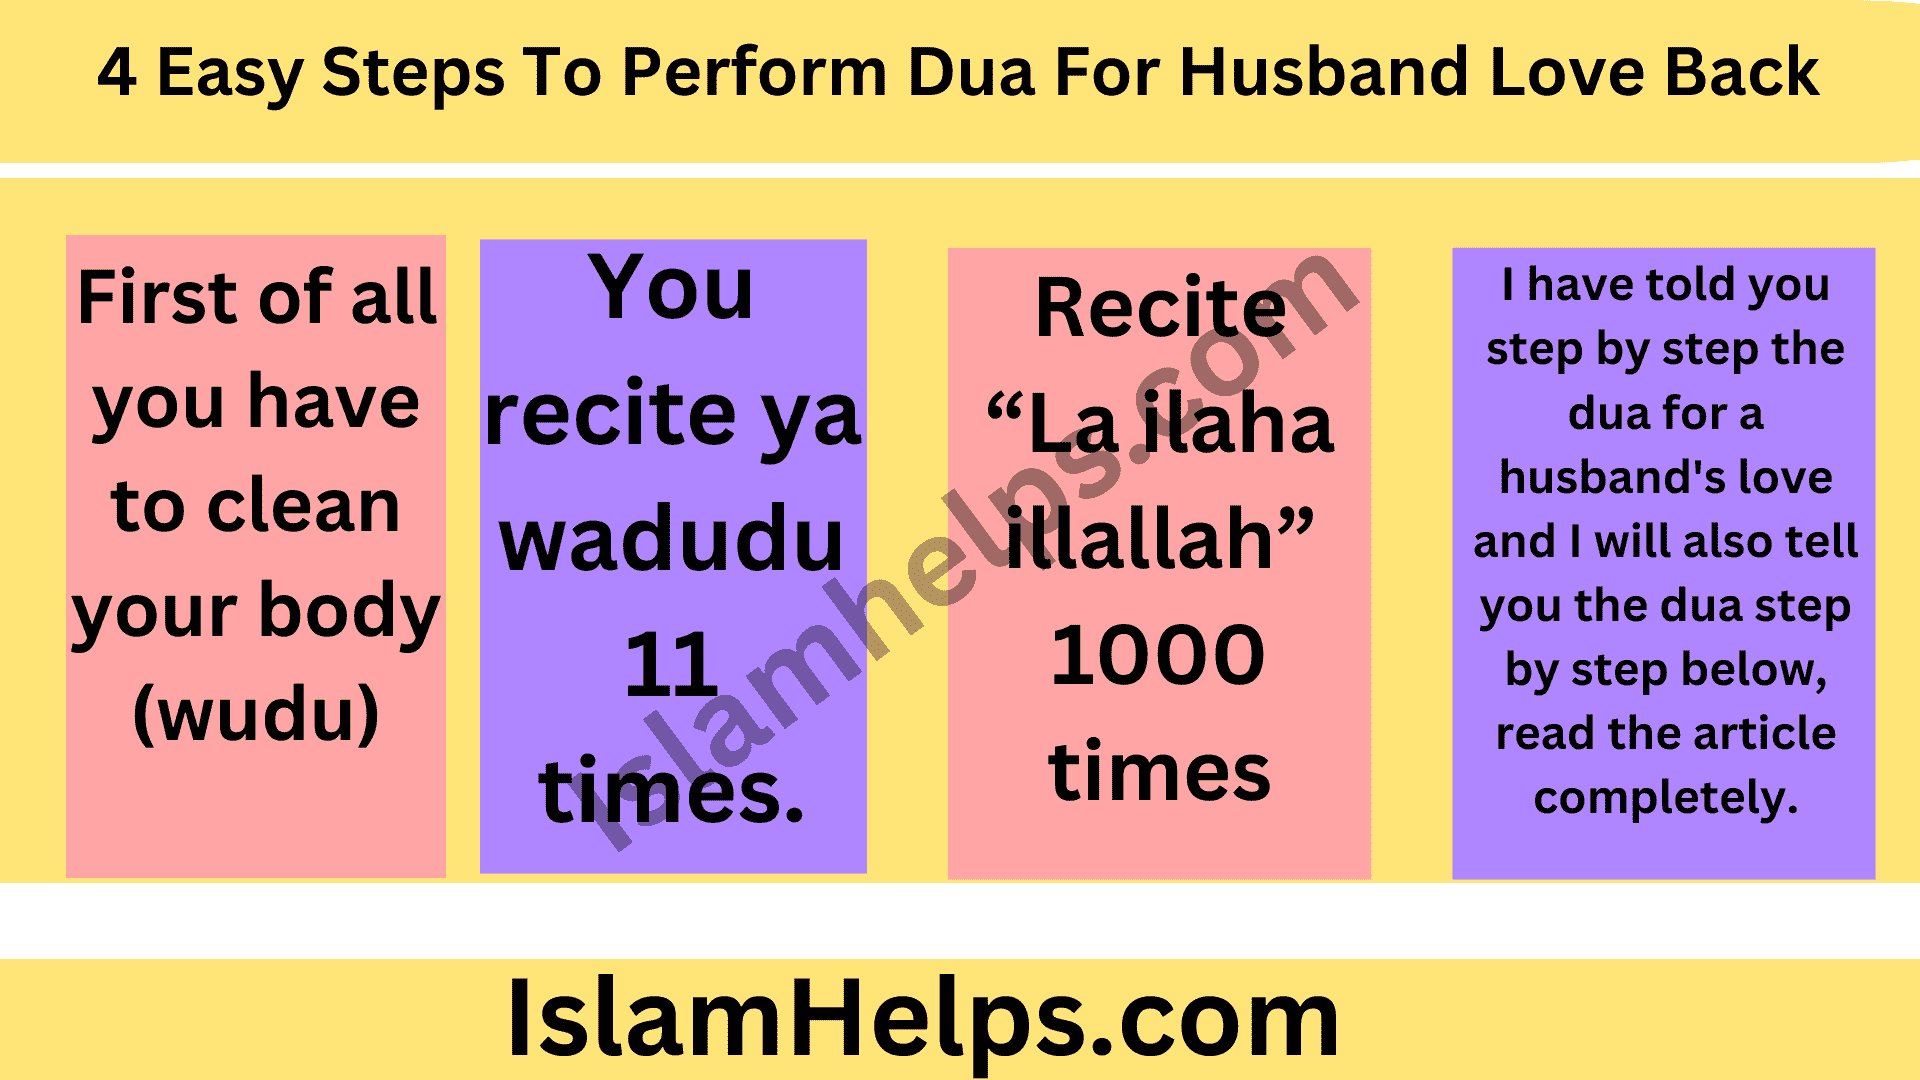 4 Easy Steps To Perform Dua For Husband Love Back 